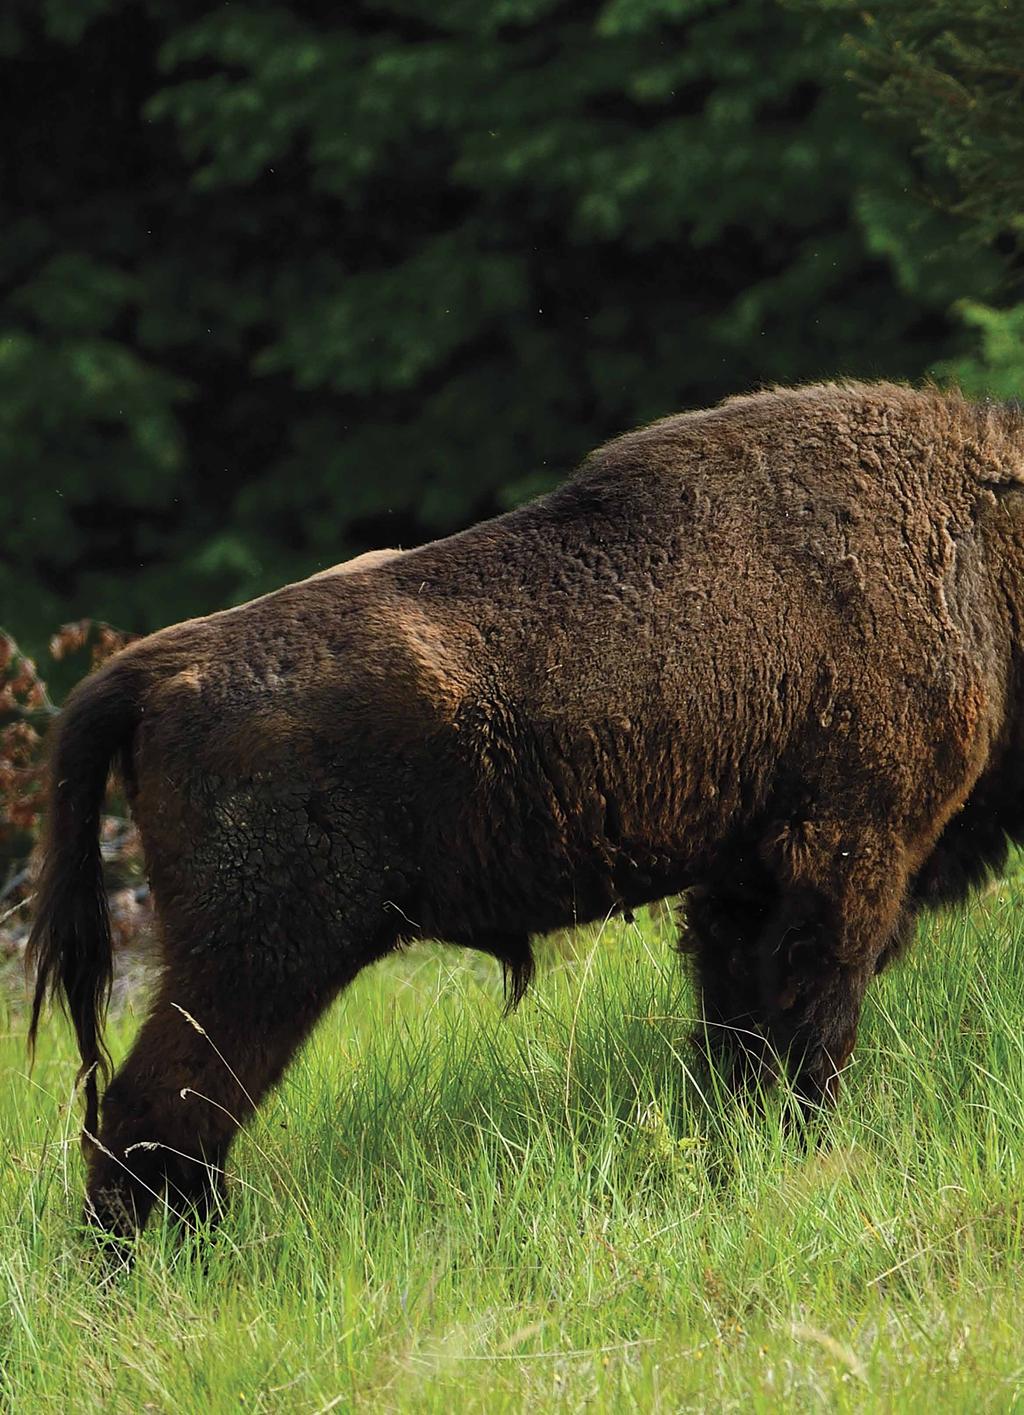 Born to be a legend Two hundred years after its extinction from the region, the European bison is once again roaming the Carpathian wilderness.